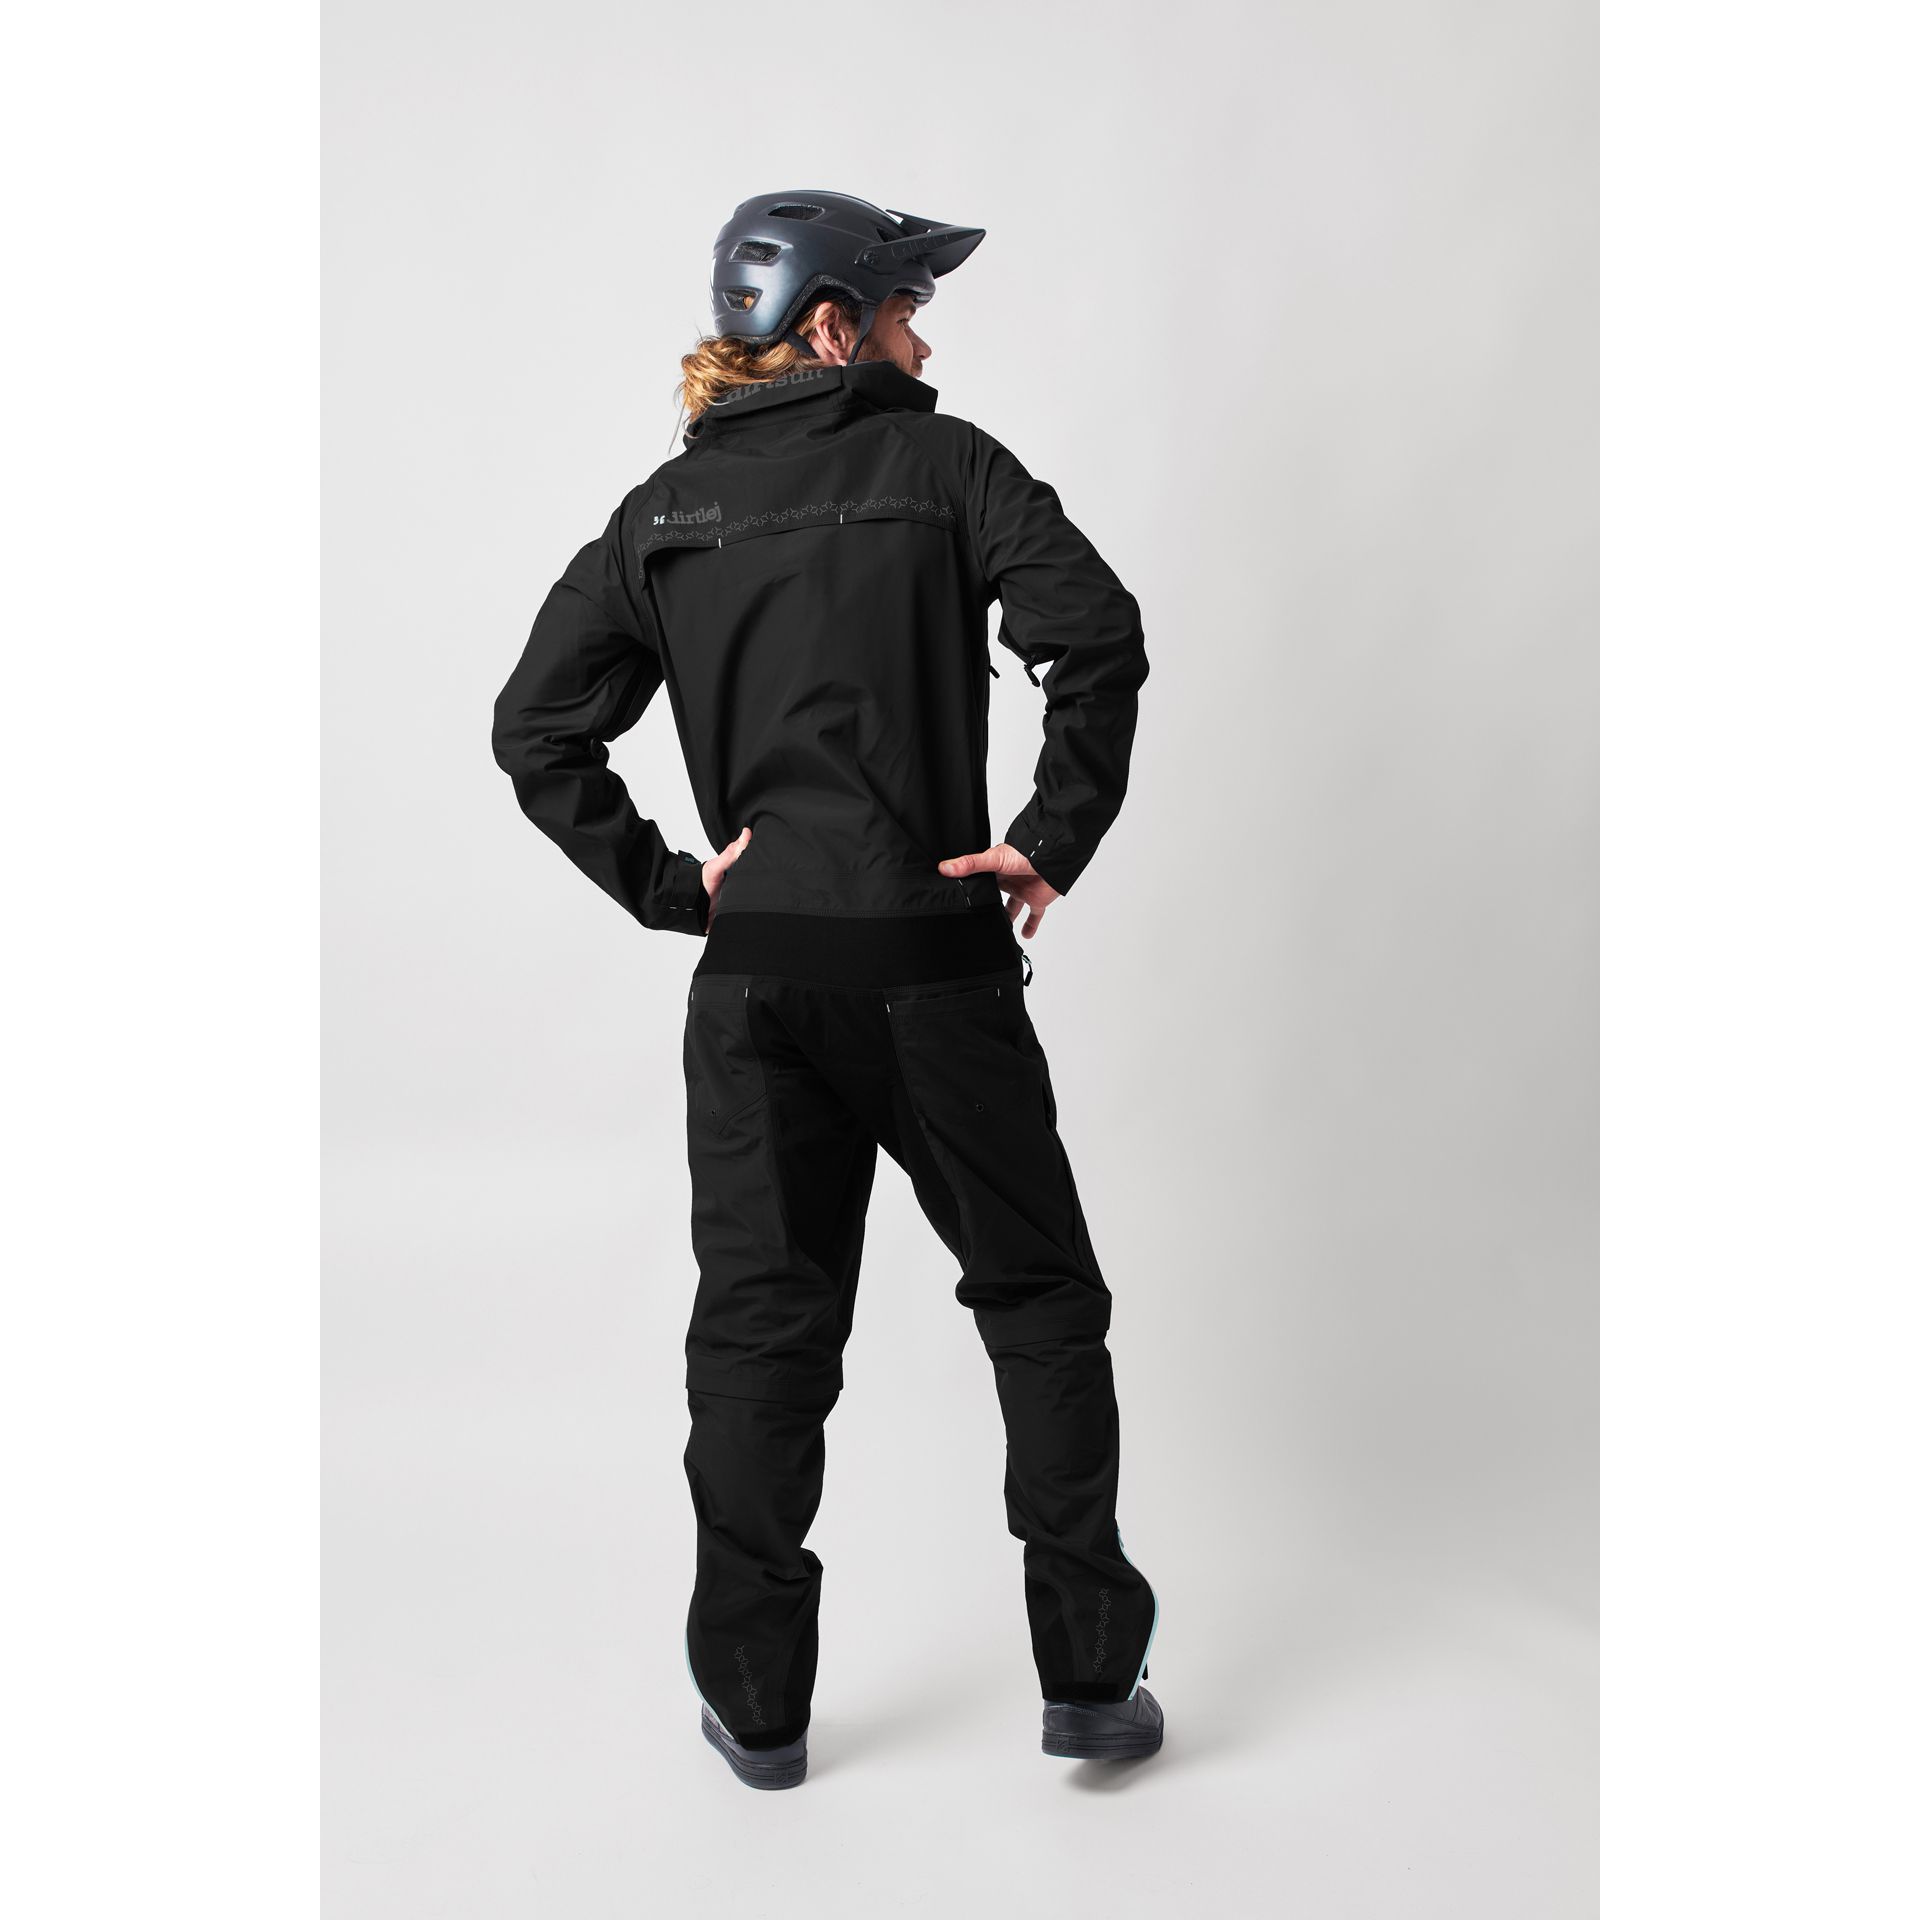 dirtsuit core edition blacklabel - Abnehmbare Beine